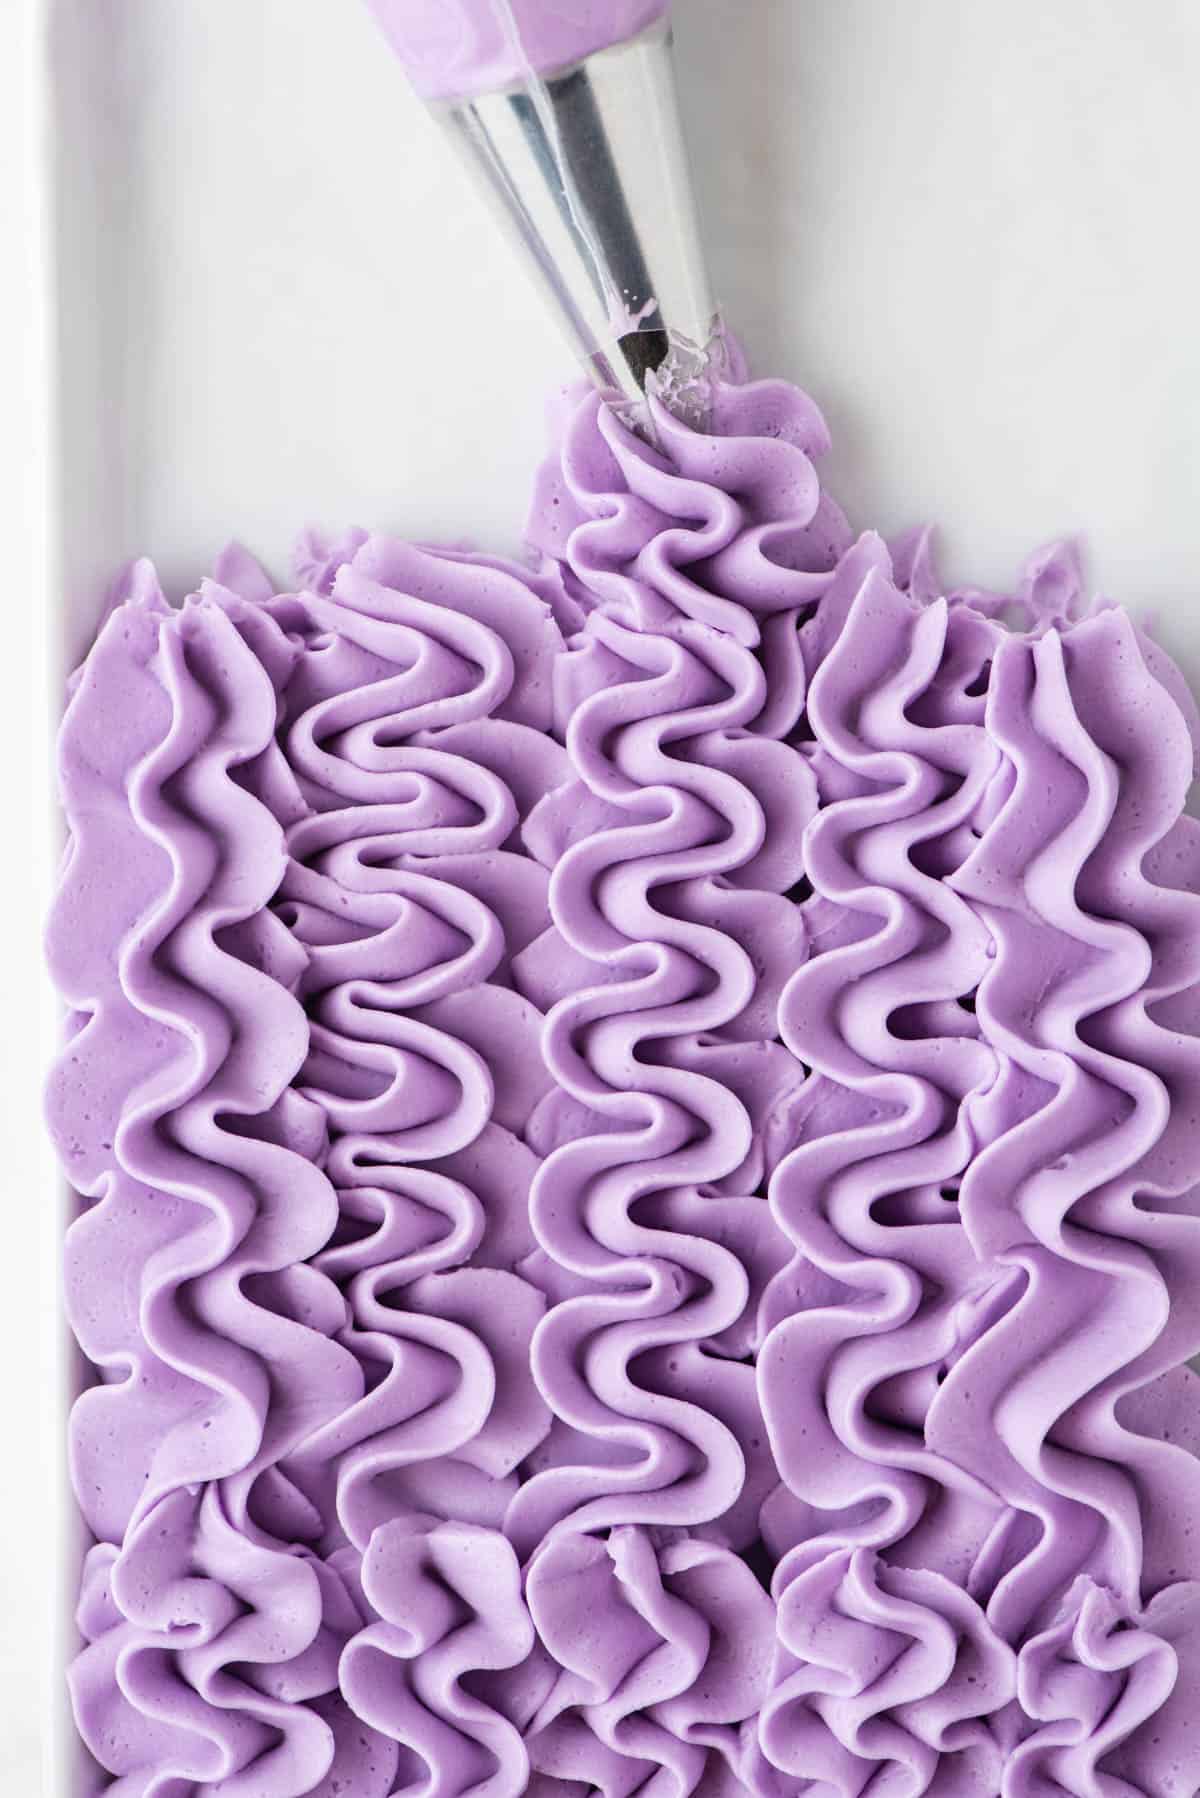 light purple frosting piped in rows with a piping bag